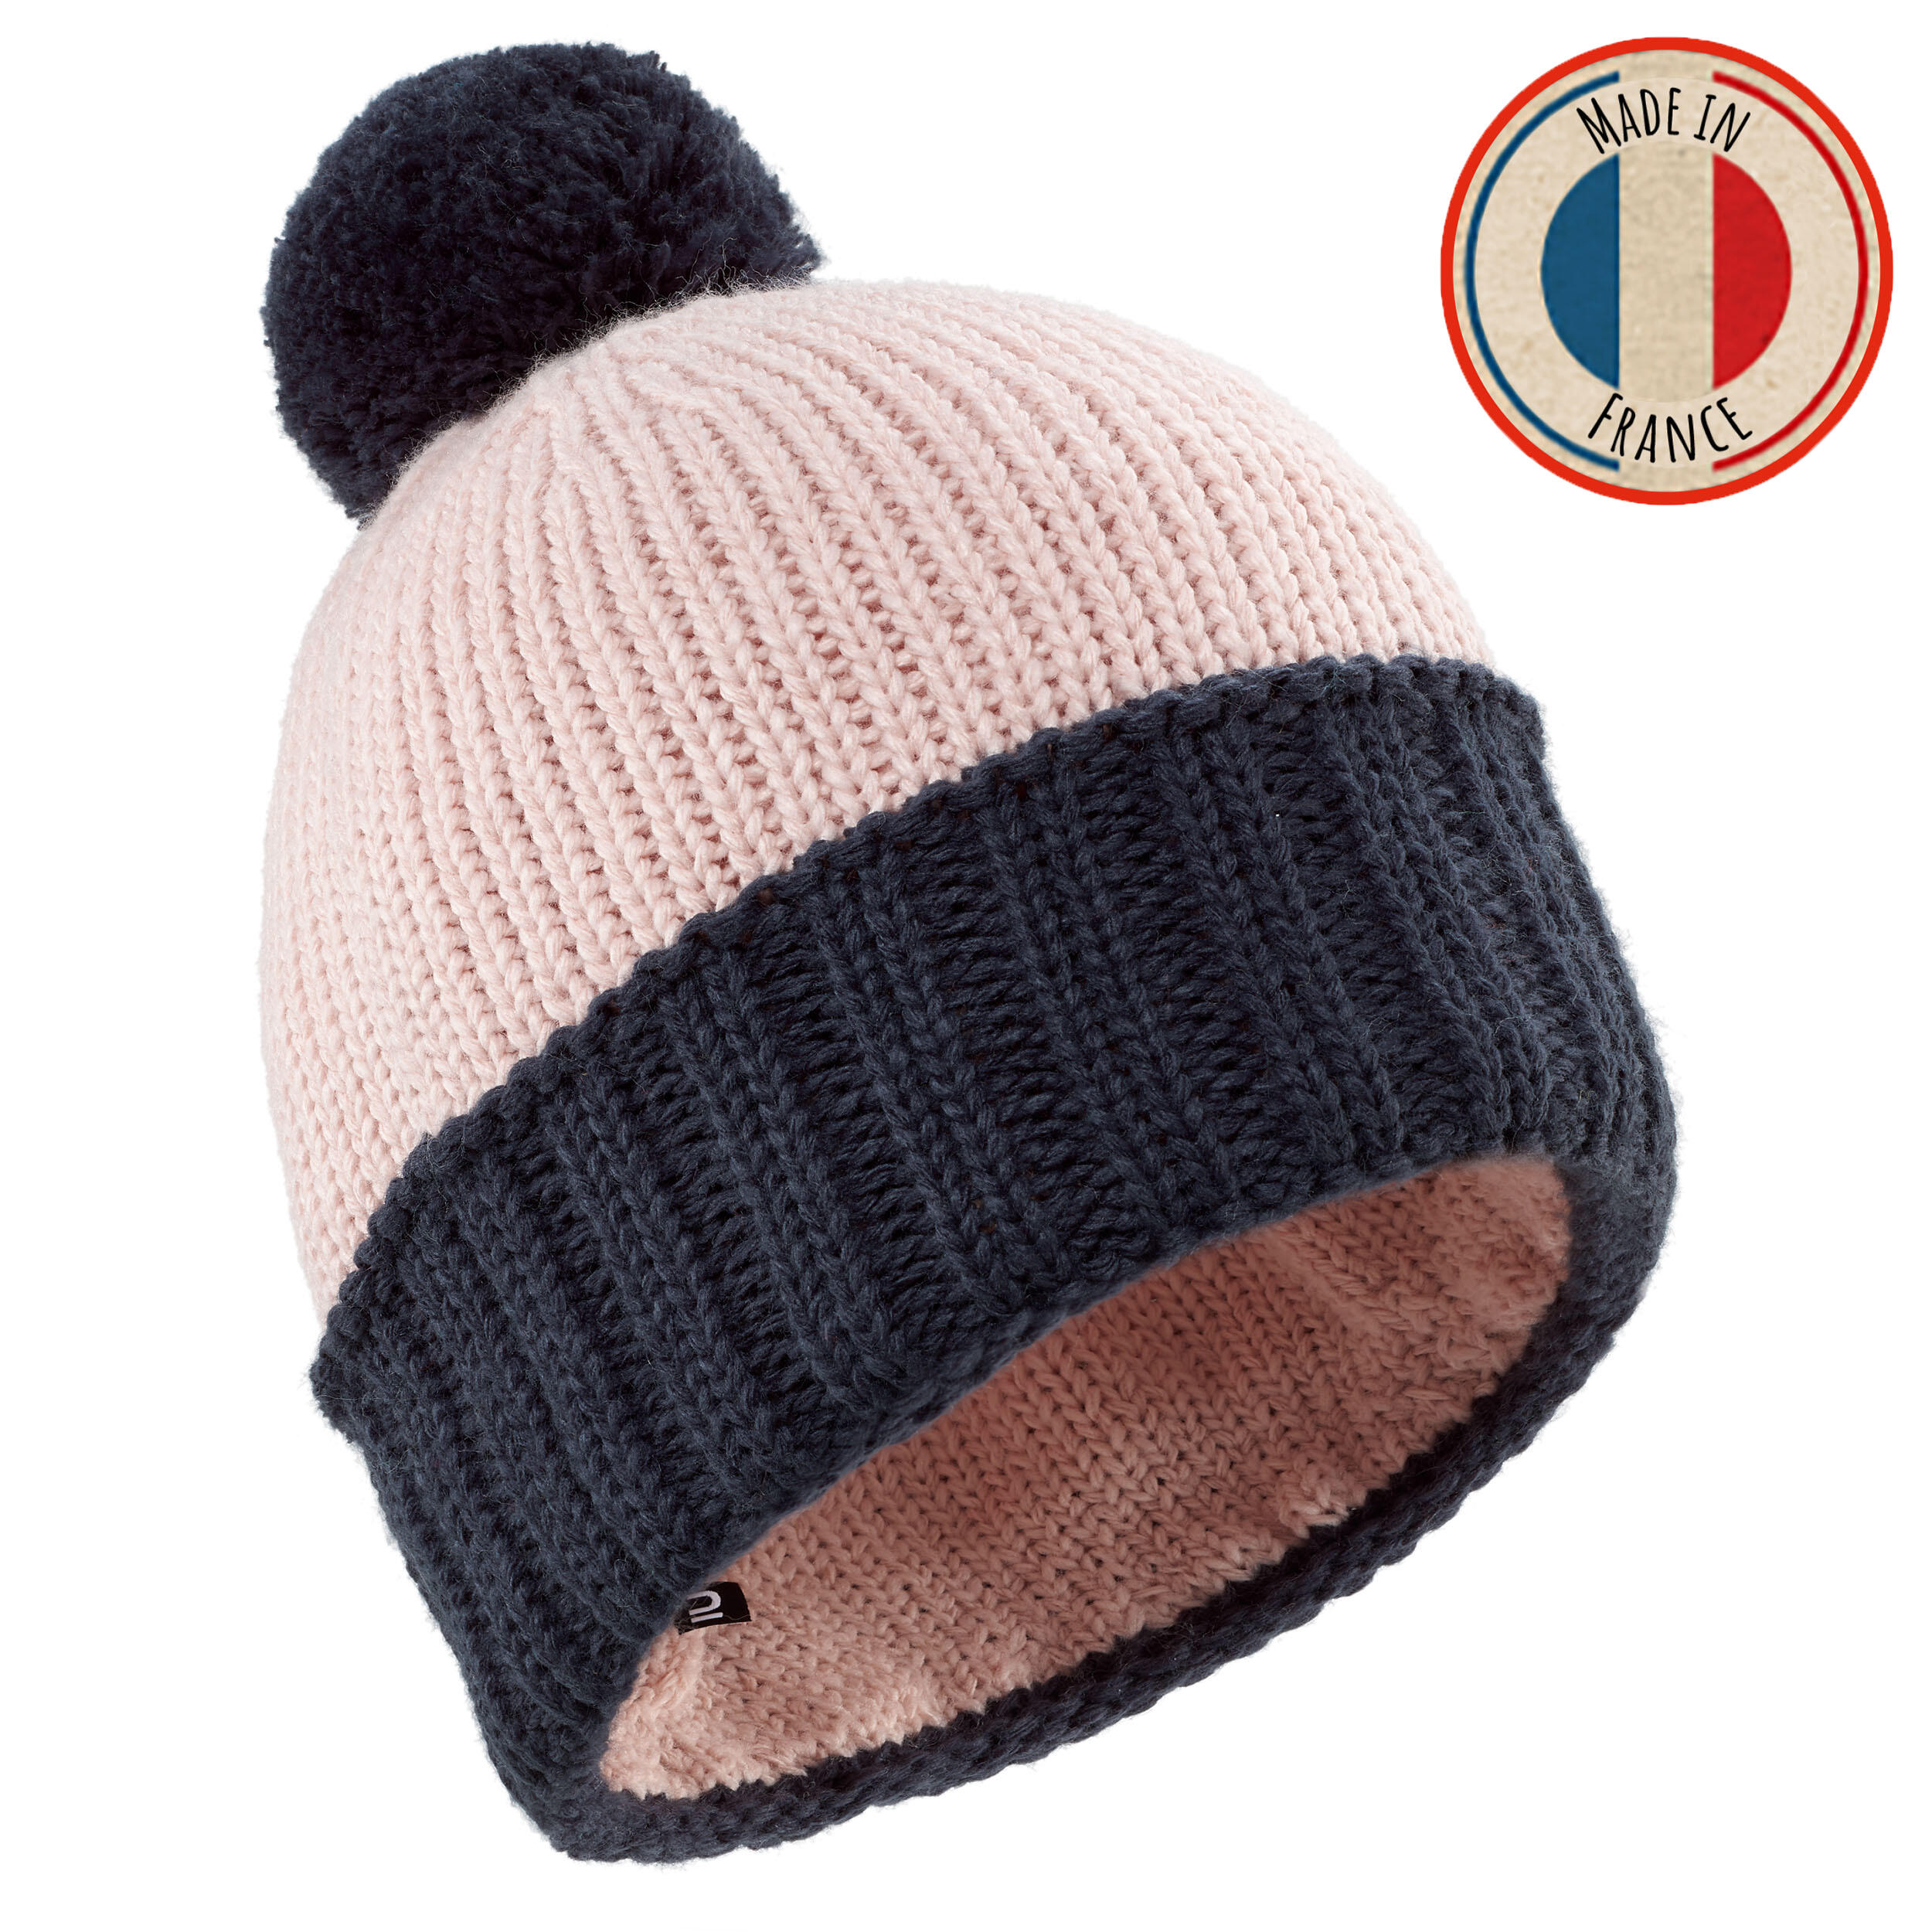 WEDZE Adult Ski Hat Grand Nord Made in France